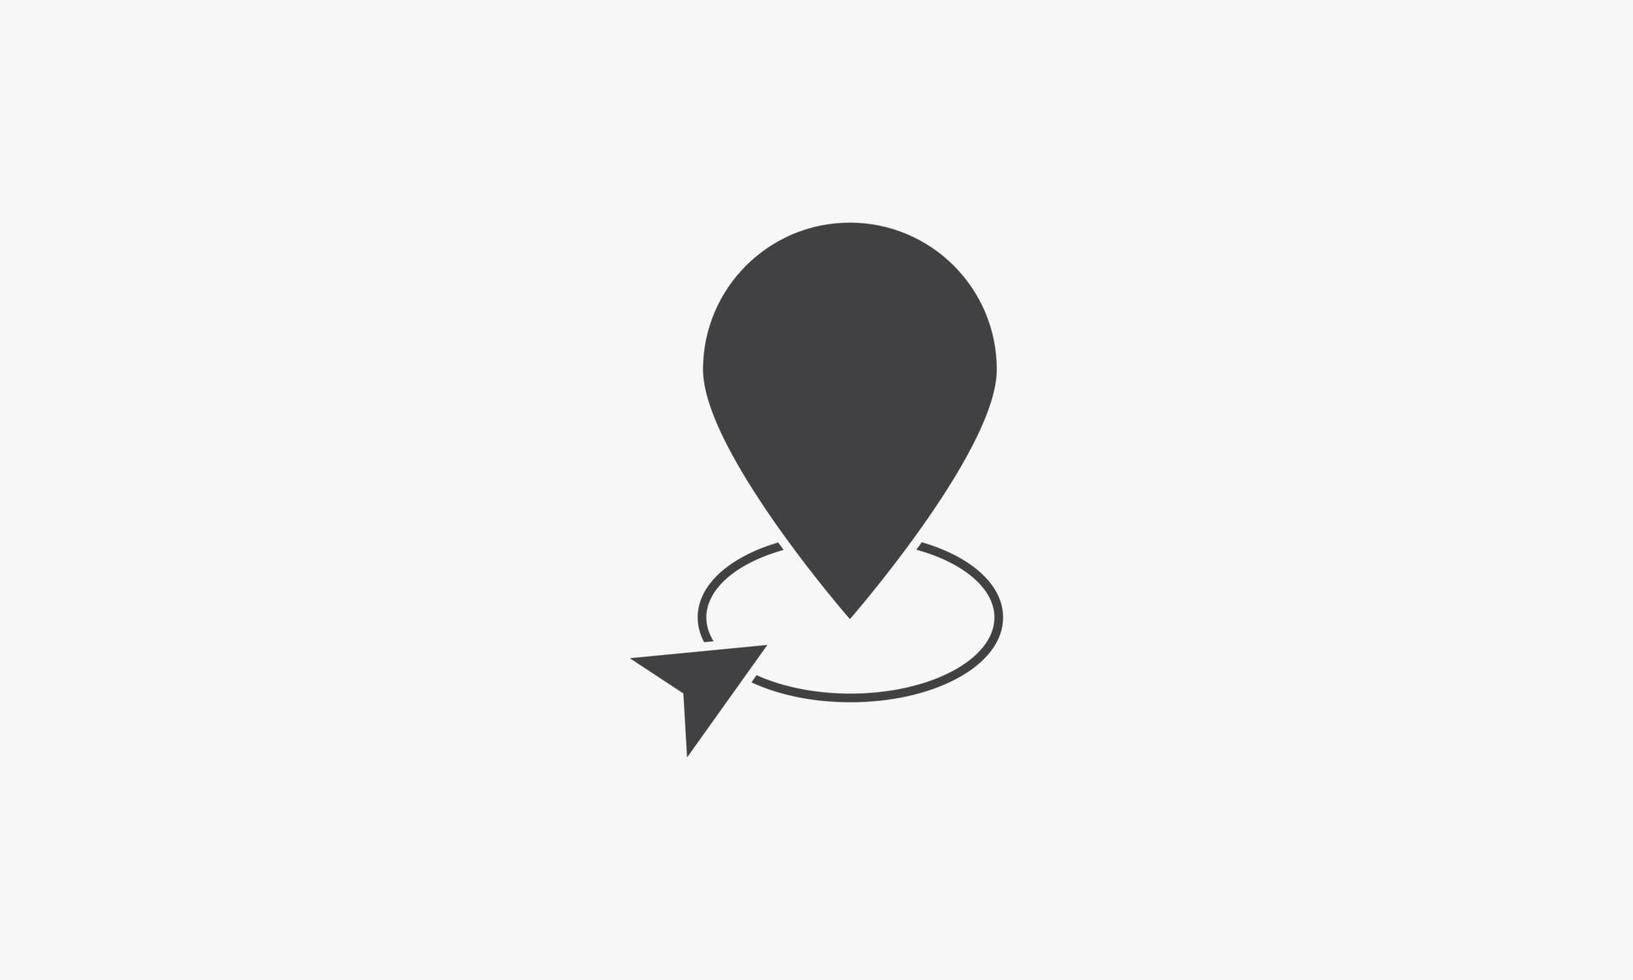 map point vector illustration on white background. creative icon.